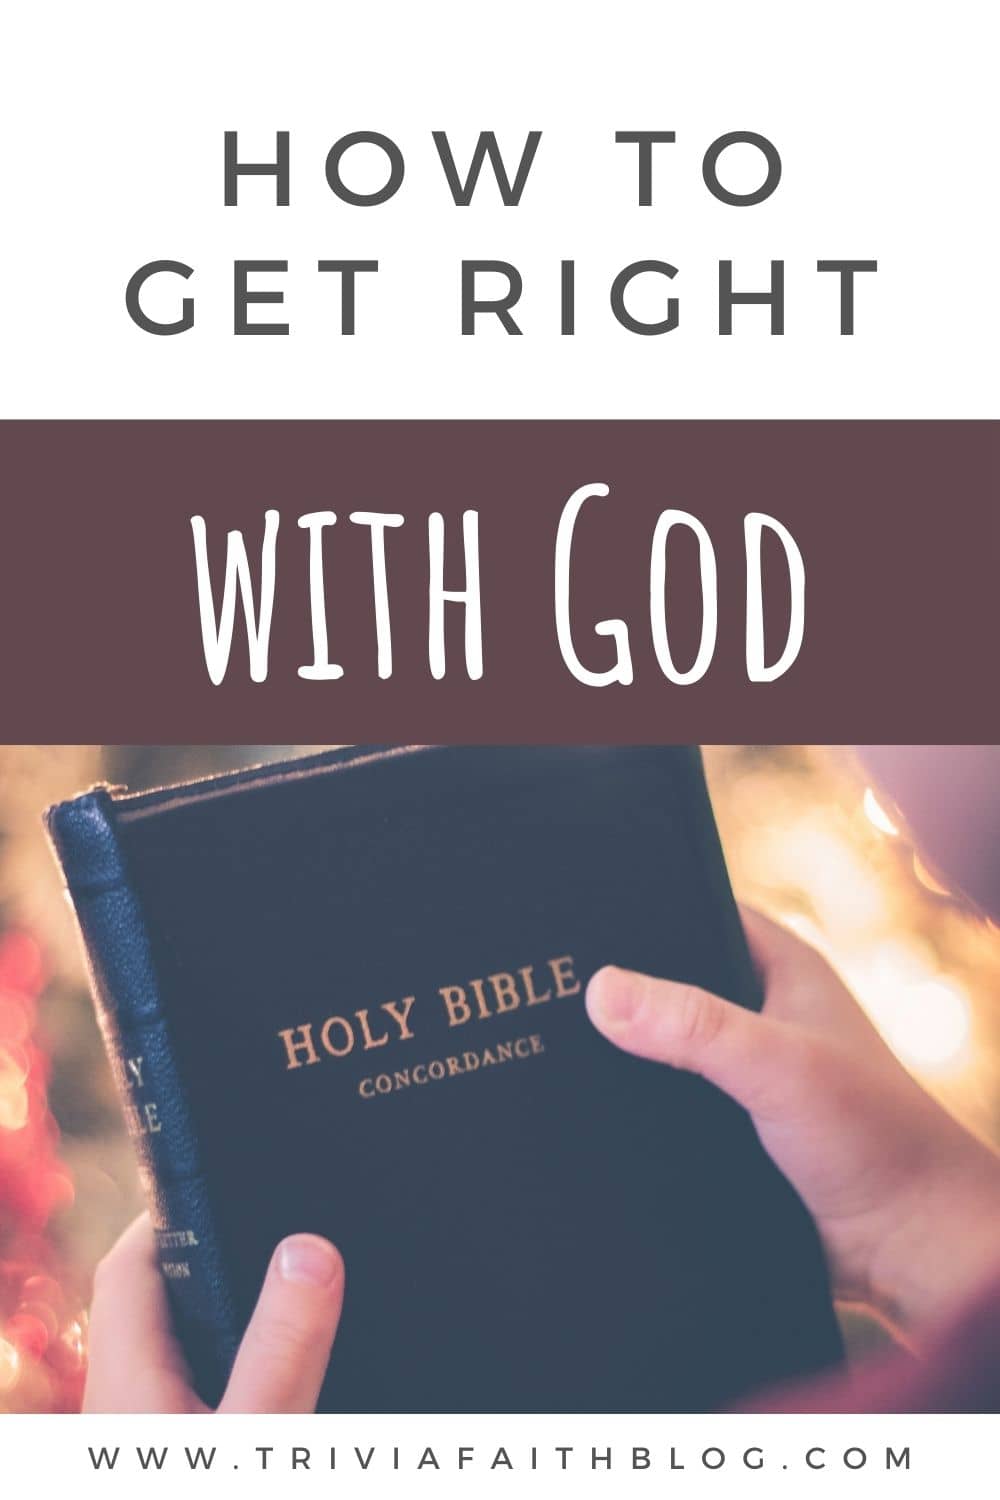 How to get right with God